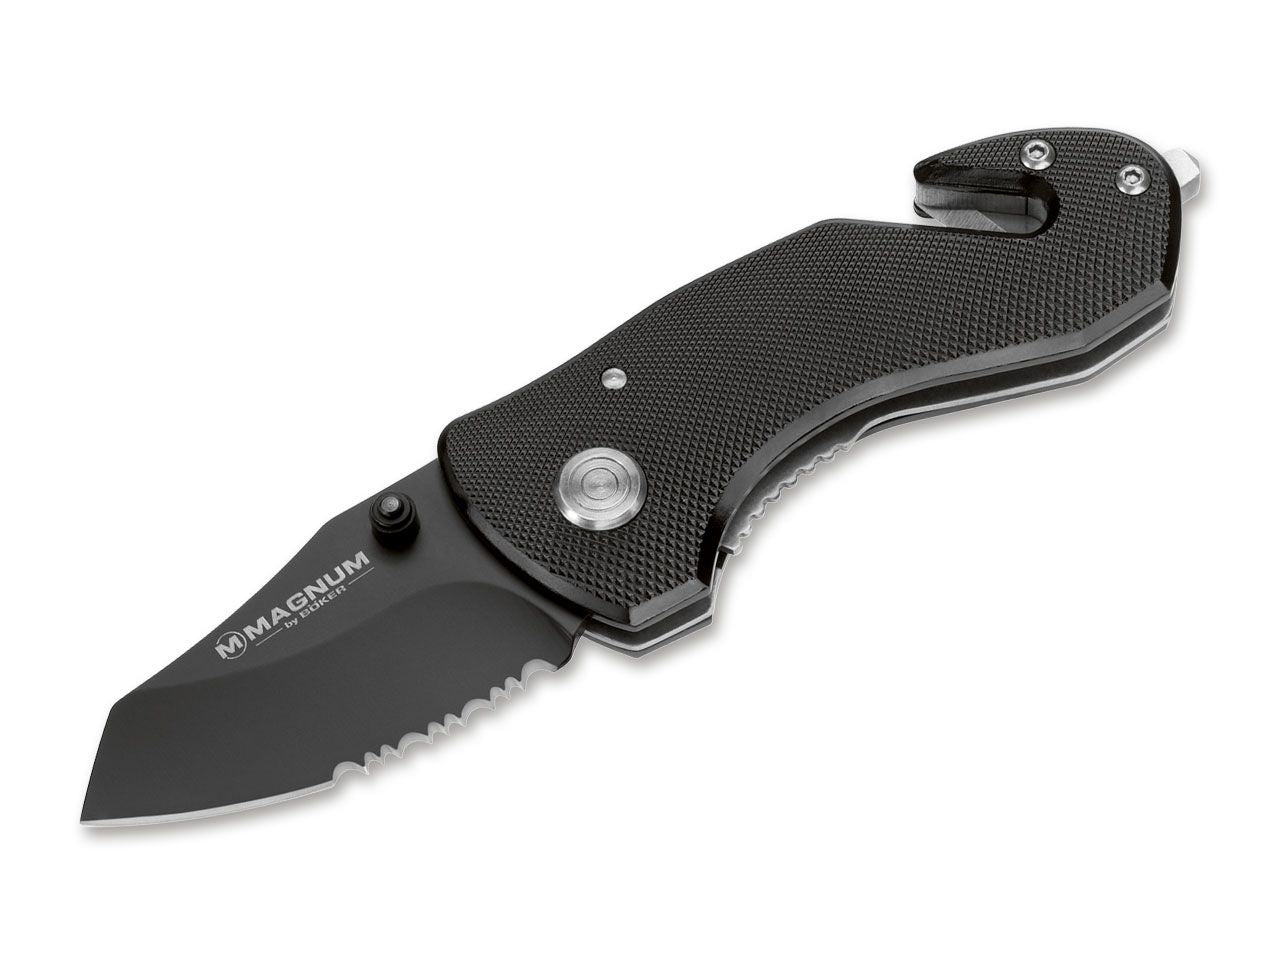 Boker Magnum Compact Rescue 2.375" Folding Knife with Belt Cutter and Glass Breaker 01MB456